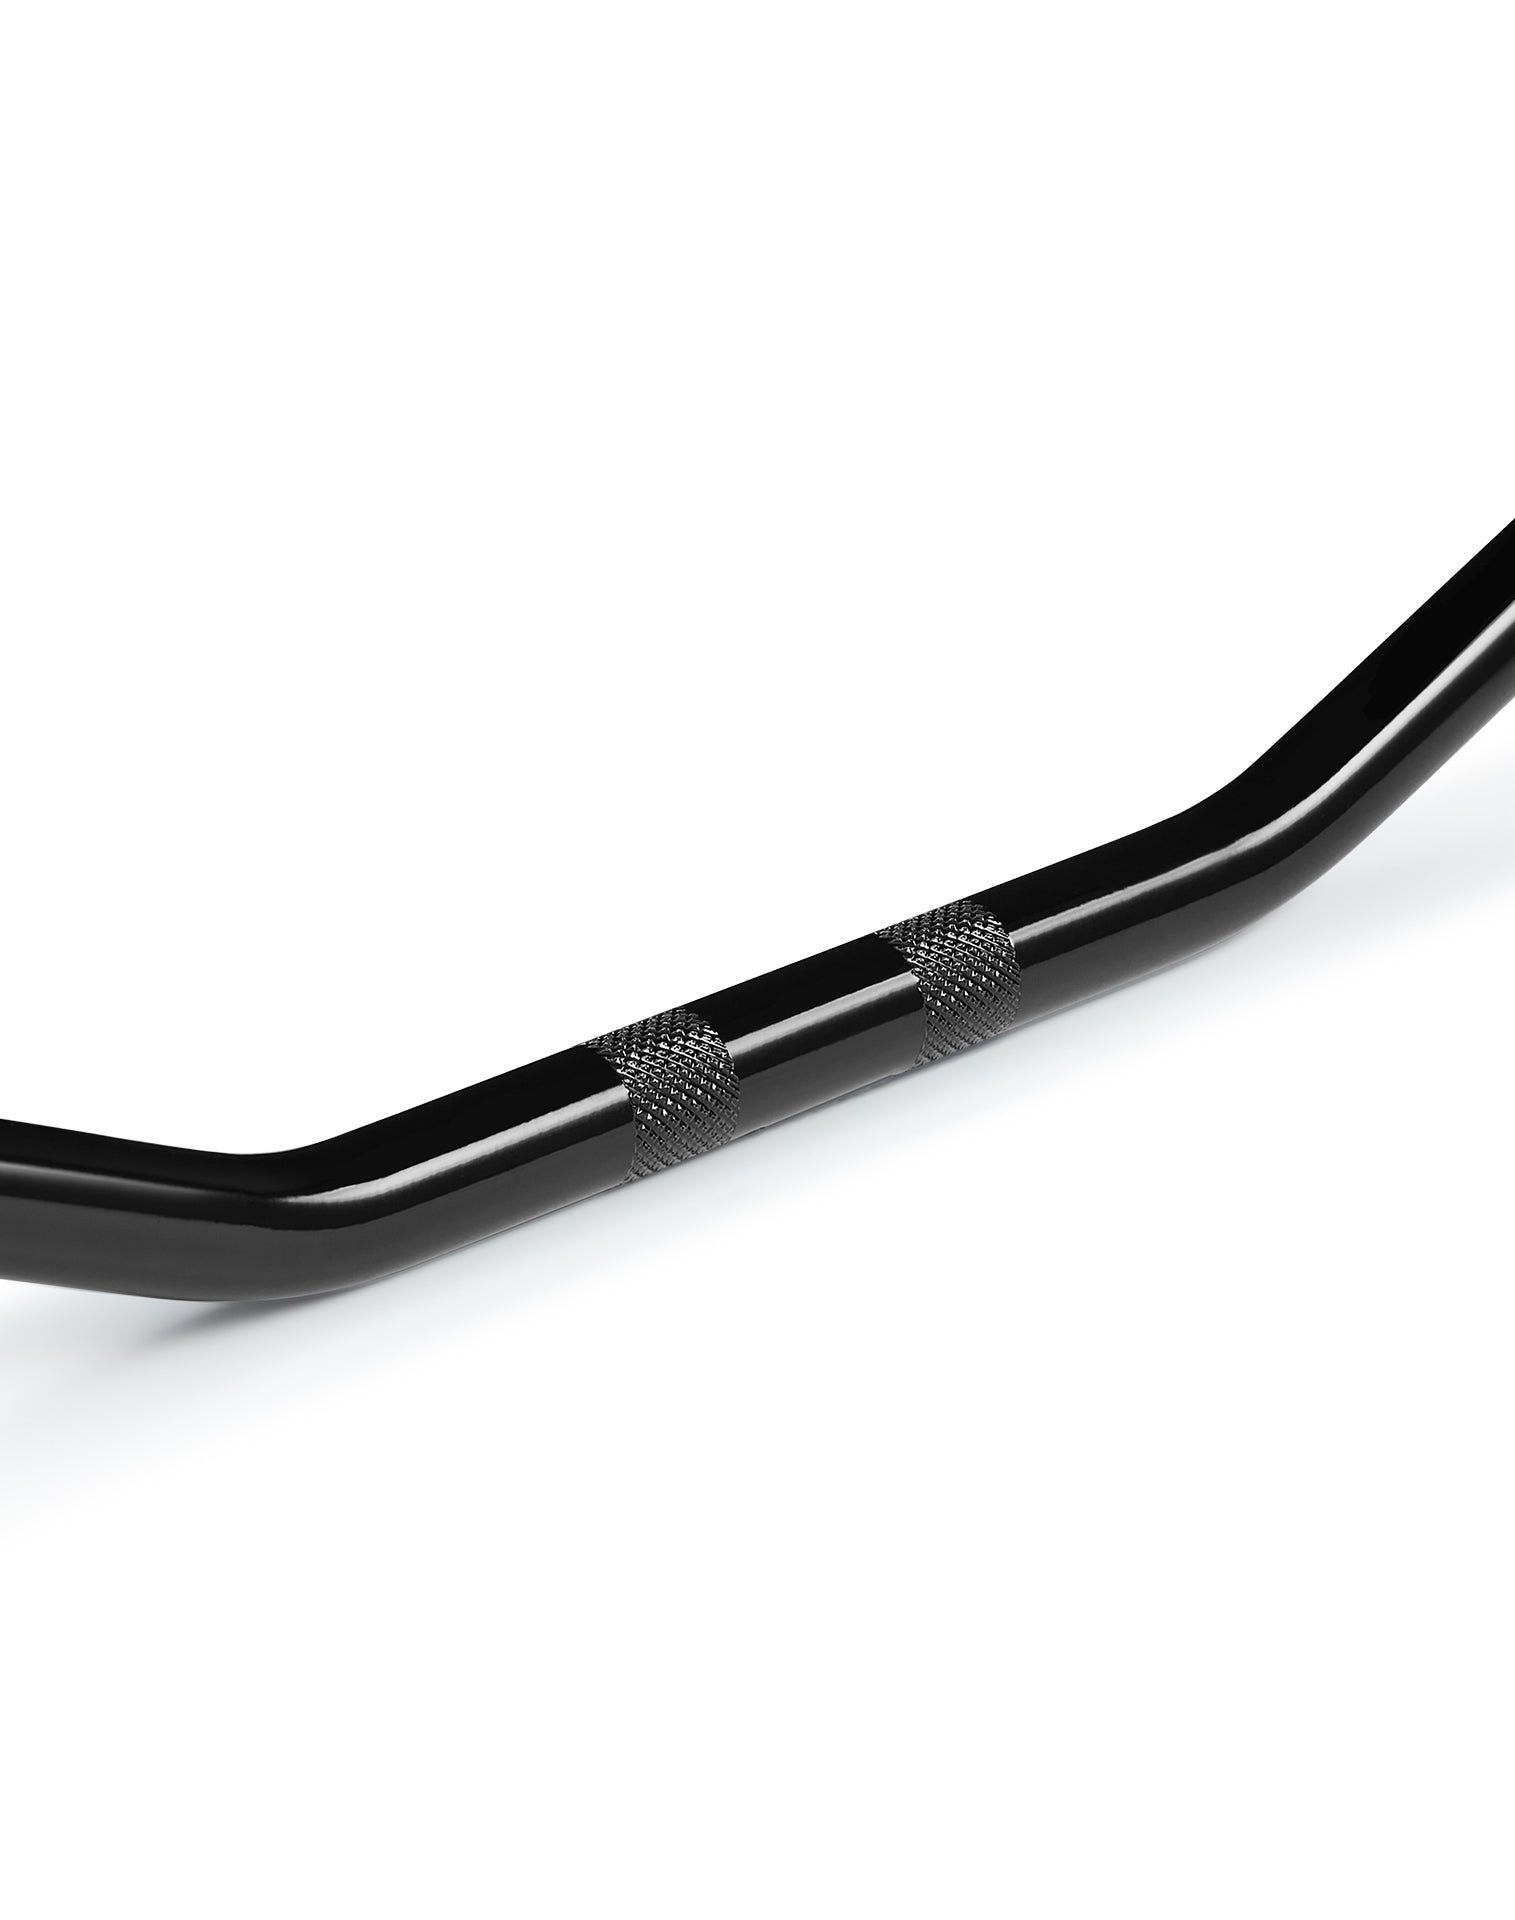 Viking Iron Born Drag Handlebar For Harley Sportster Forty Eight Gloss Black Close Up View